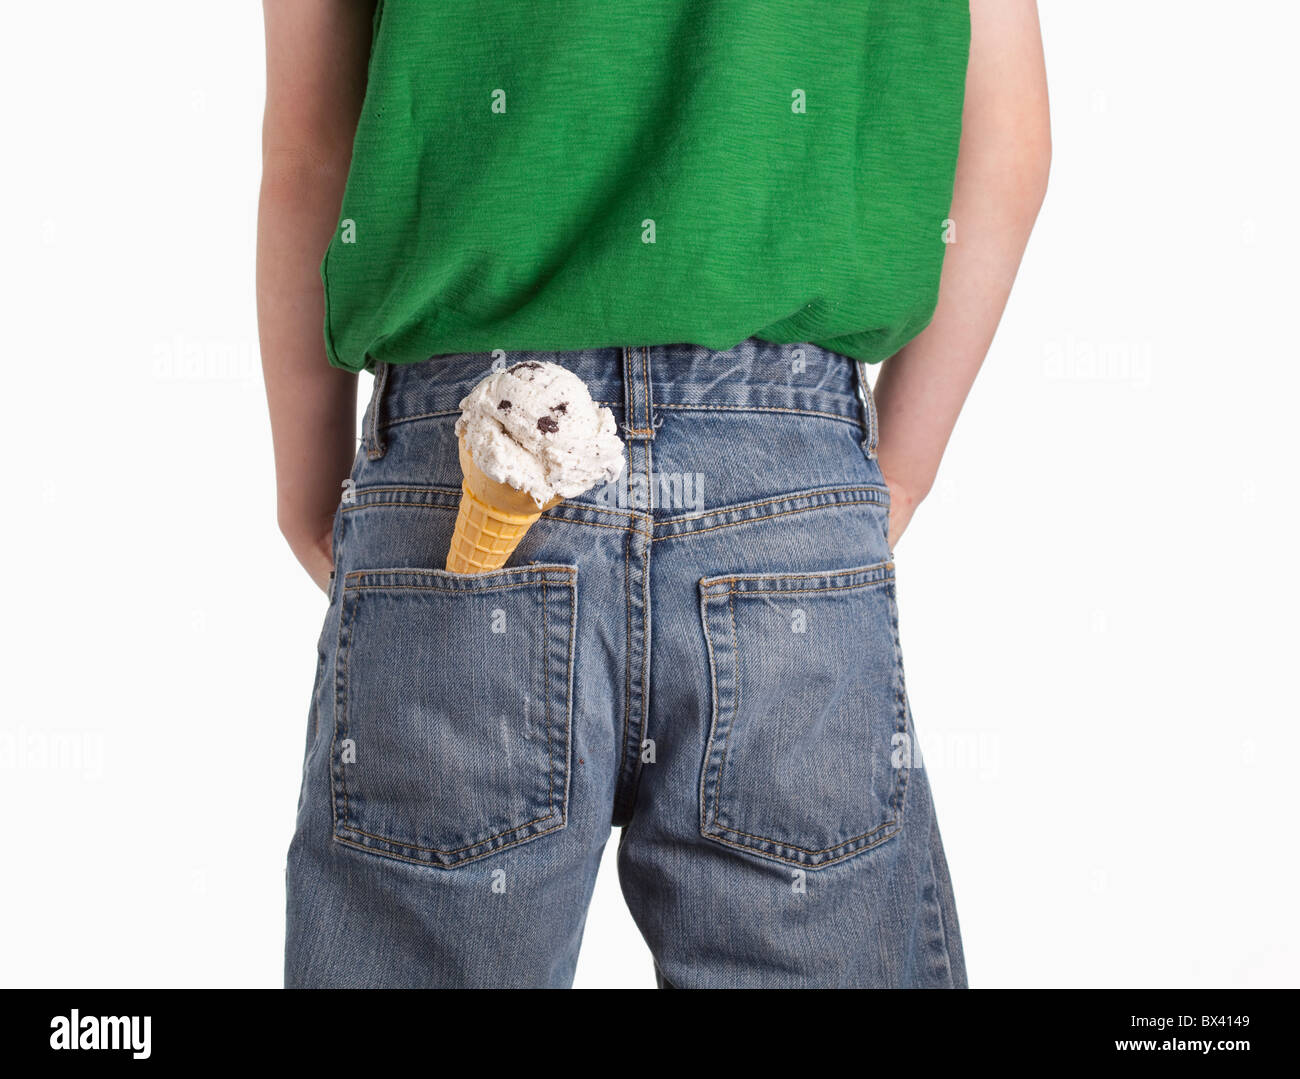 A Boy With An Ice Cream Cone In His Back Pocket Stock Photo